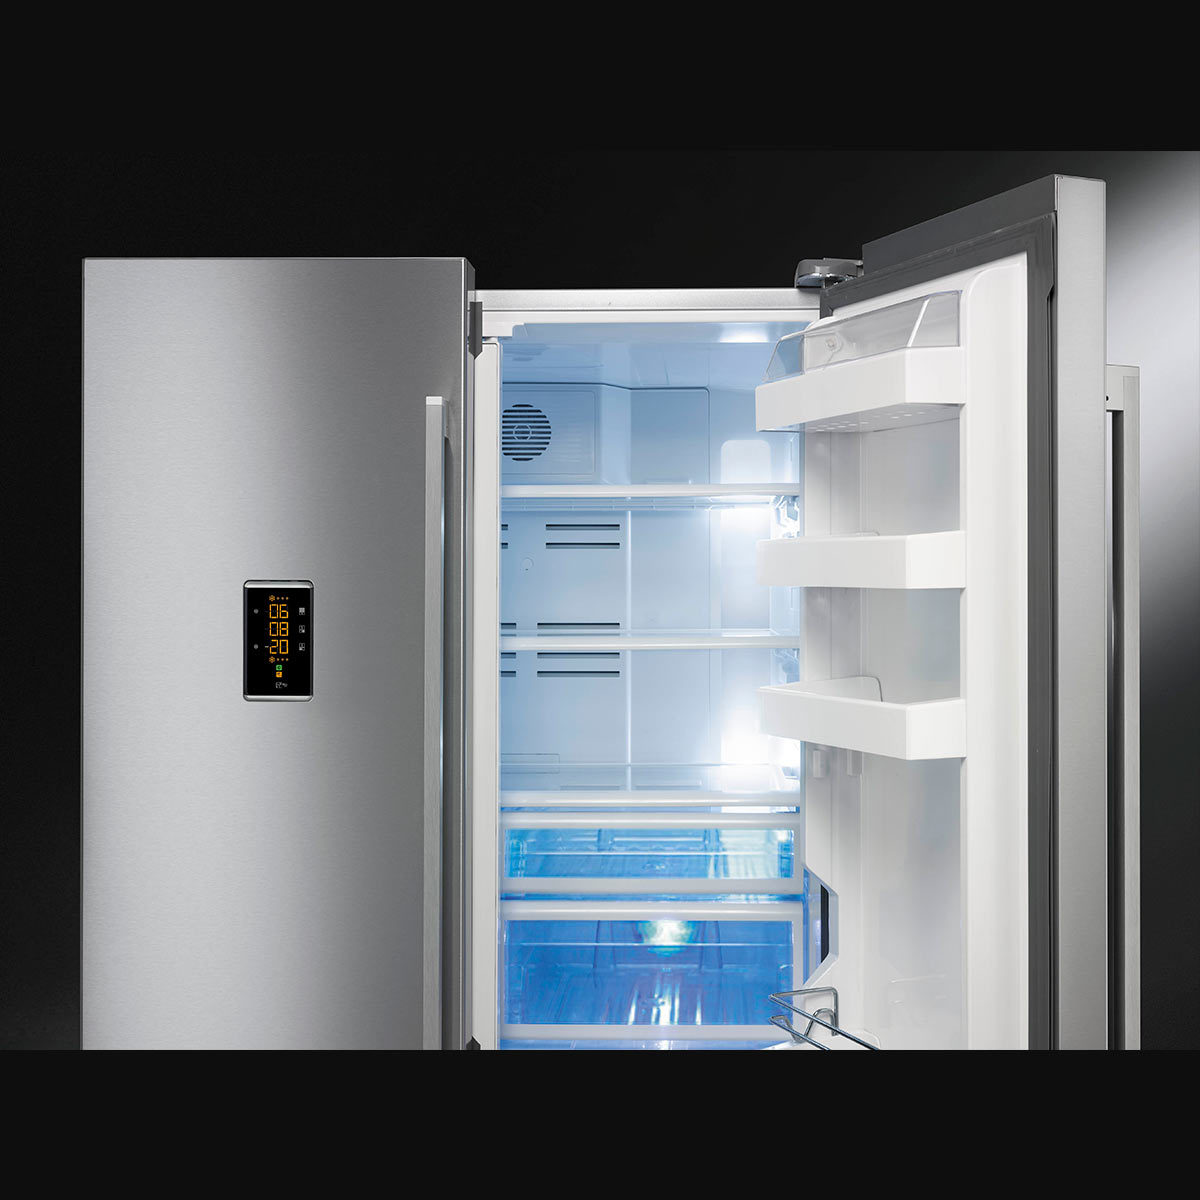 Smeg FQ60XPE, Multidoor Fridge Freezer A+ Rated in Stainless Steel